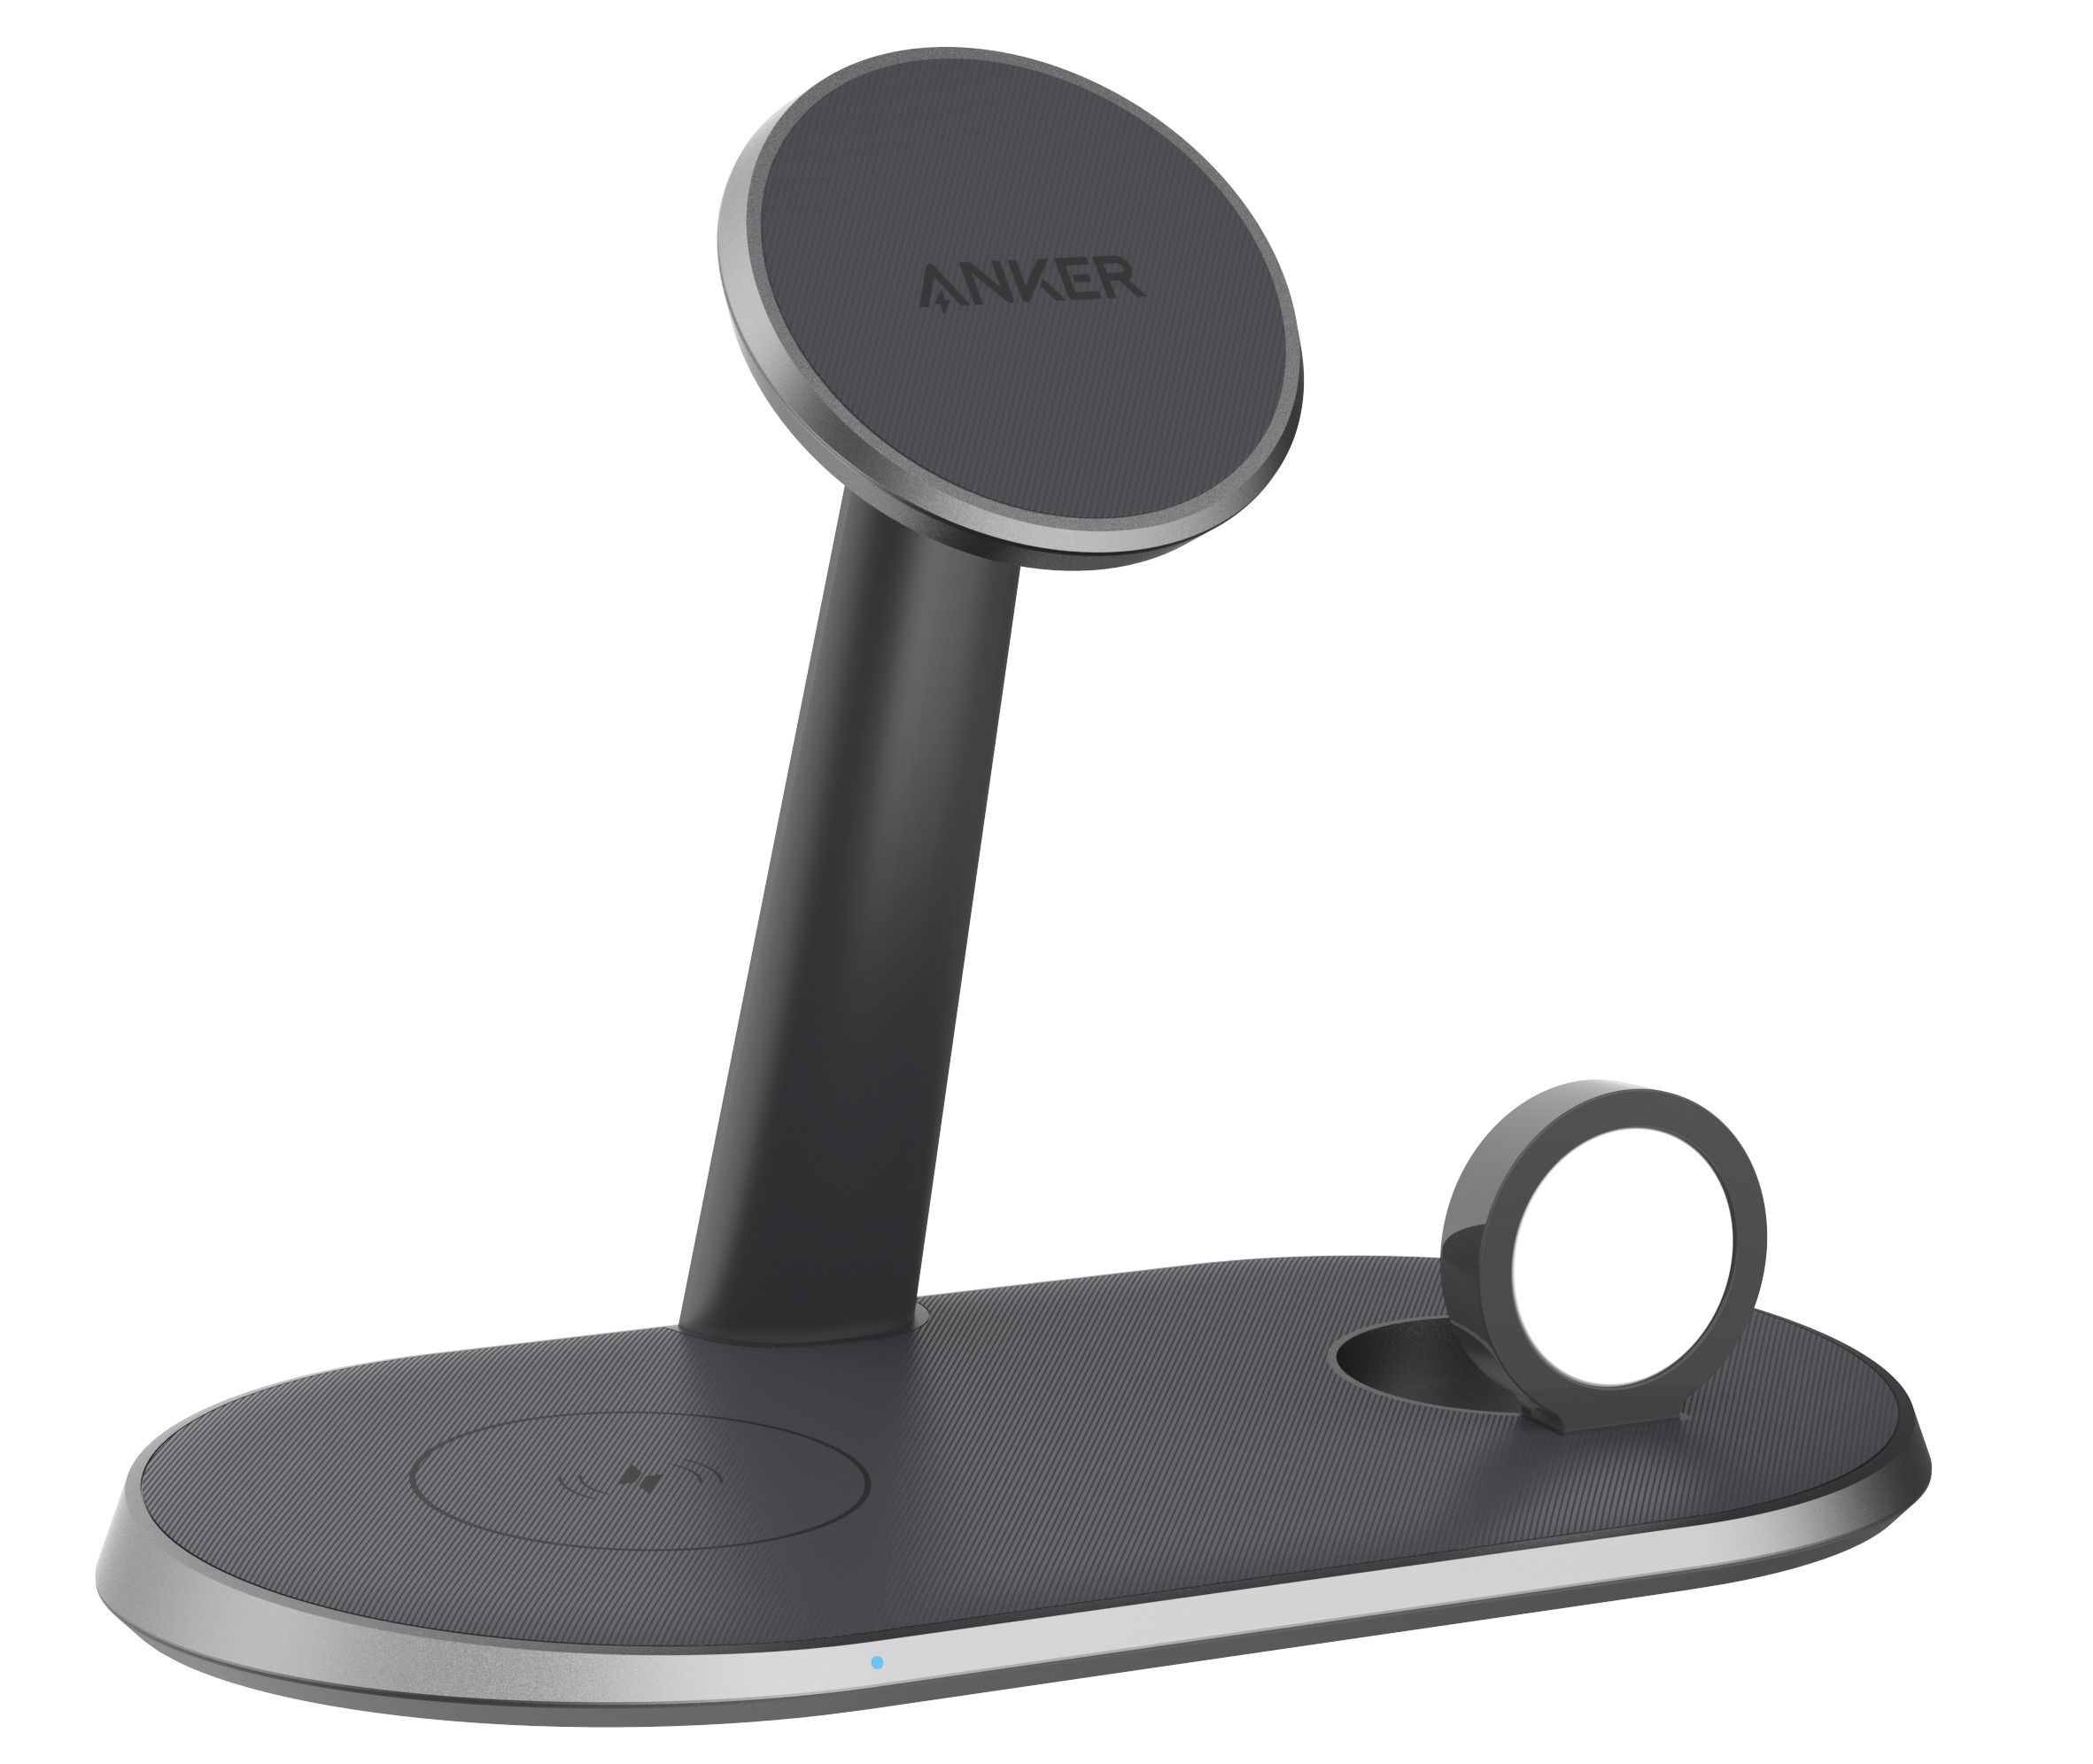 Anker magsafe. Anker 2-in-1 Magnetic Wireless Charging Stand. Anker POWERWAVE Magnetic 2-in-1 Stand White. POWERWAVE Magnetic Stand. POWERWAVE Magnetic 2-in-1 Stand купить.